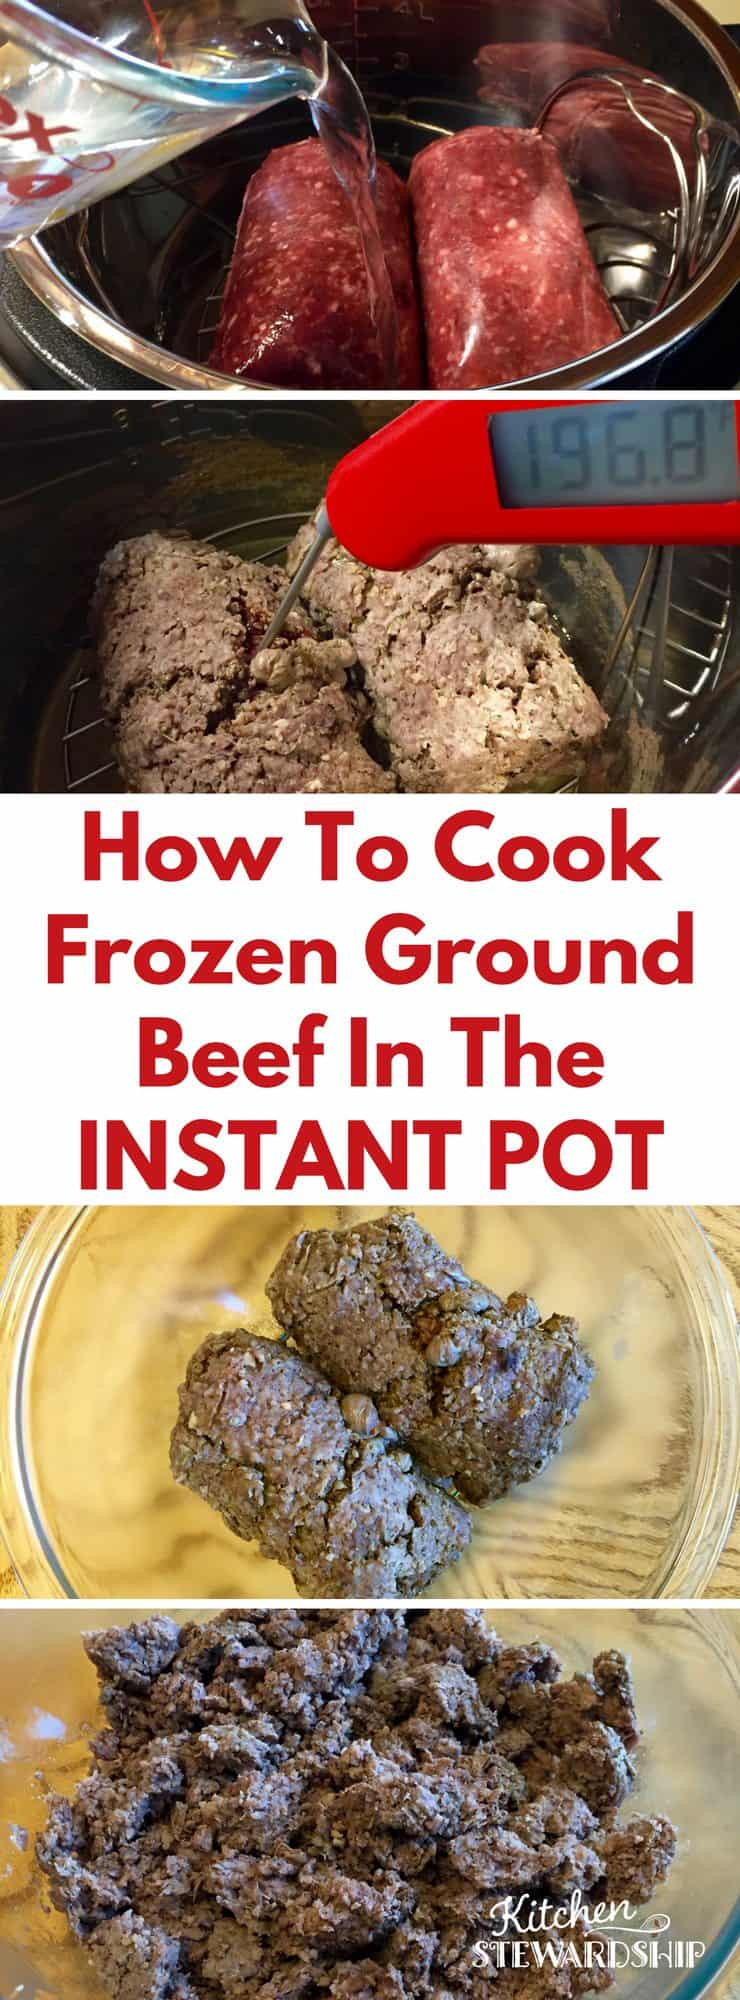 How Long Is Frozen Ground Beef Good For
 do you have to cook ground beef before putting it in the